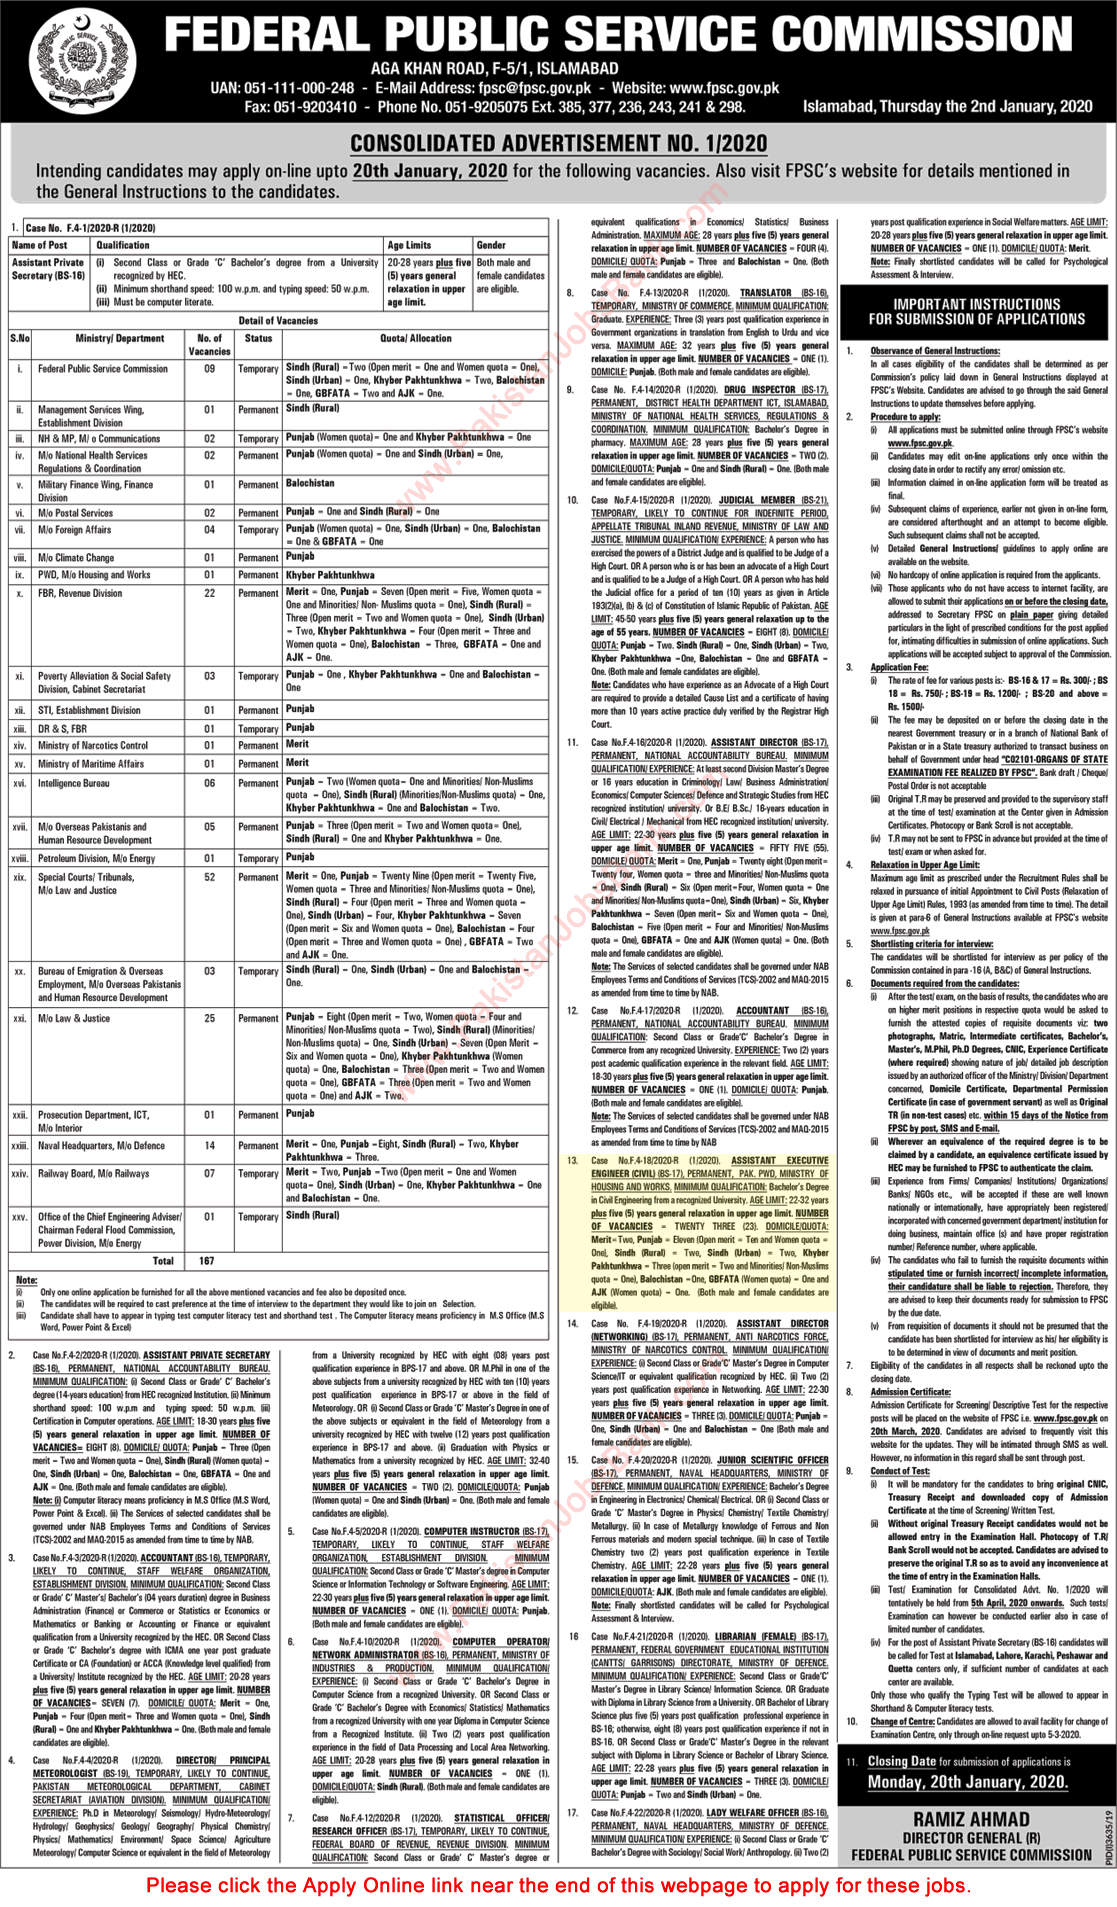 Civil Engineer Jobs in Ministry of Housing and Works 2020 January FPSC Online Apply Latest